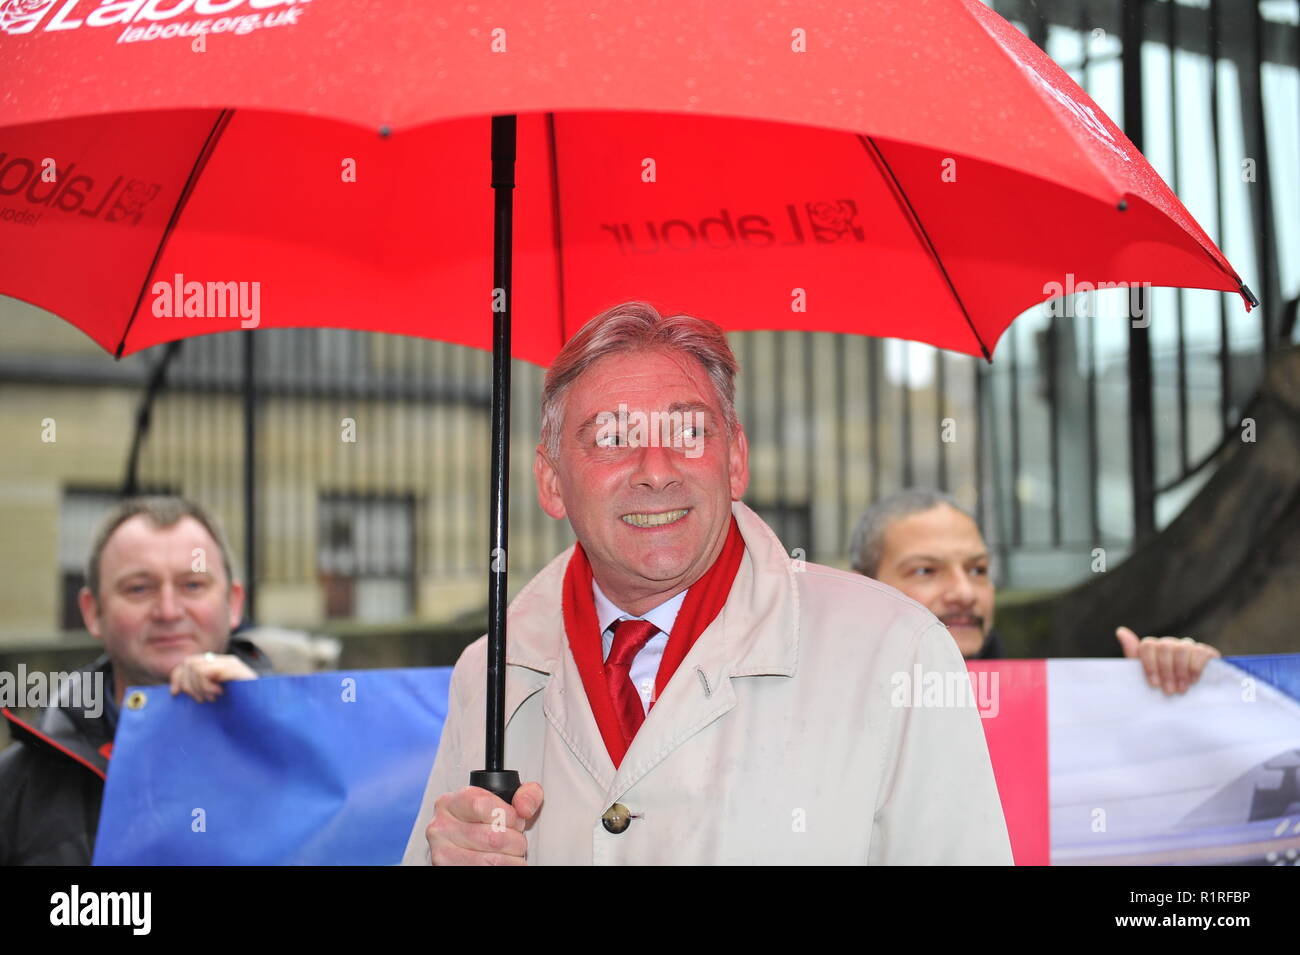 Edinburgh, UK. 14th Nov, 2018. Ahead of a Holyrood vote calling for the ScotRail break clause to be exercised, Scottish Labour leader Richard Leonard (seen taking cover from the rain) and Transport spokesperson Colin Smyth campaign at Waverley station. Credit: Colin Fisher/Alamy Live News Stock Photo